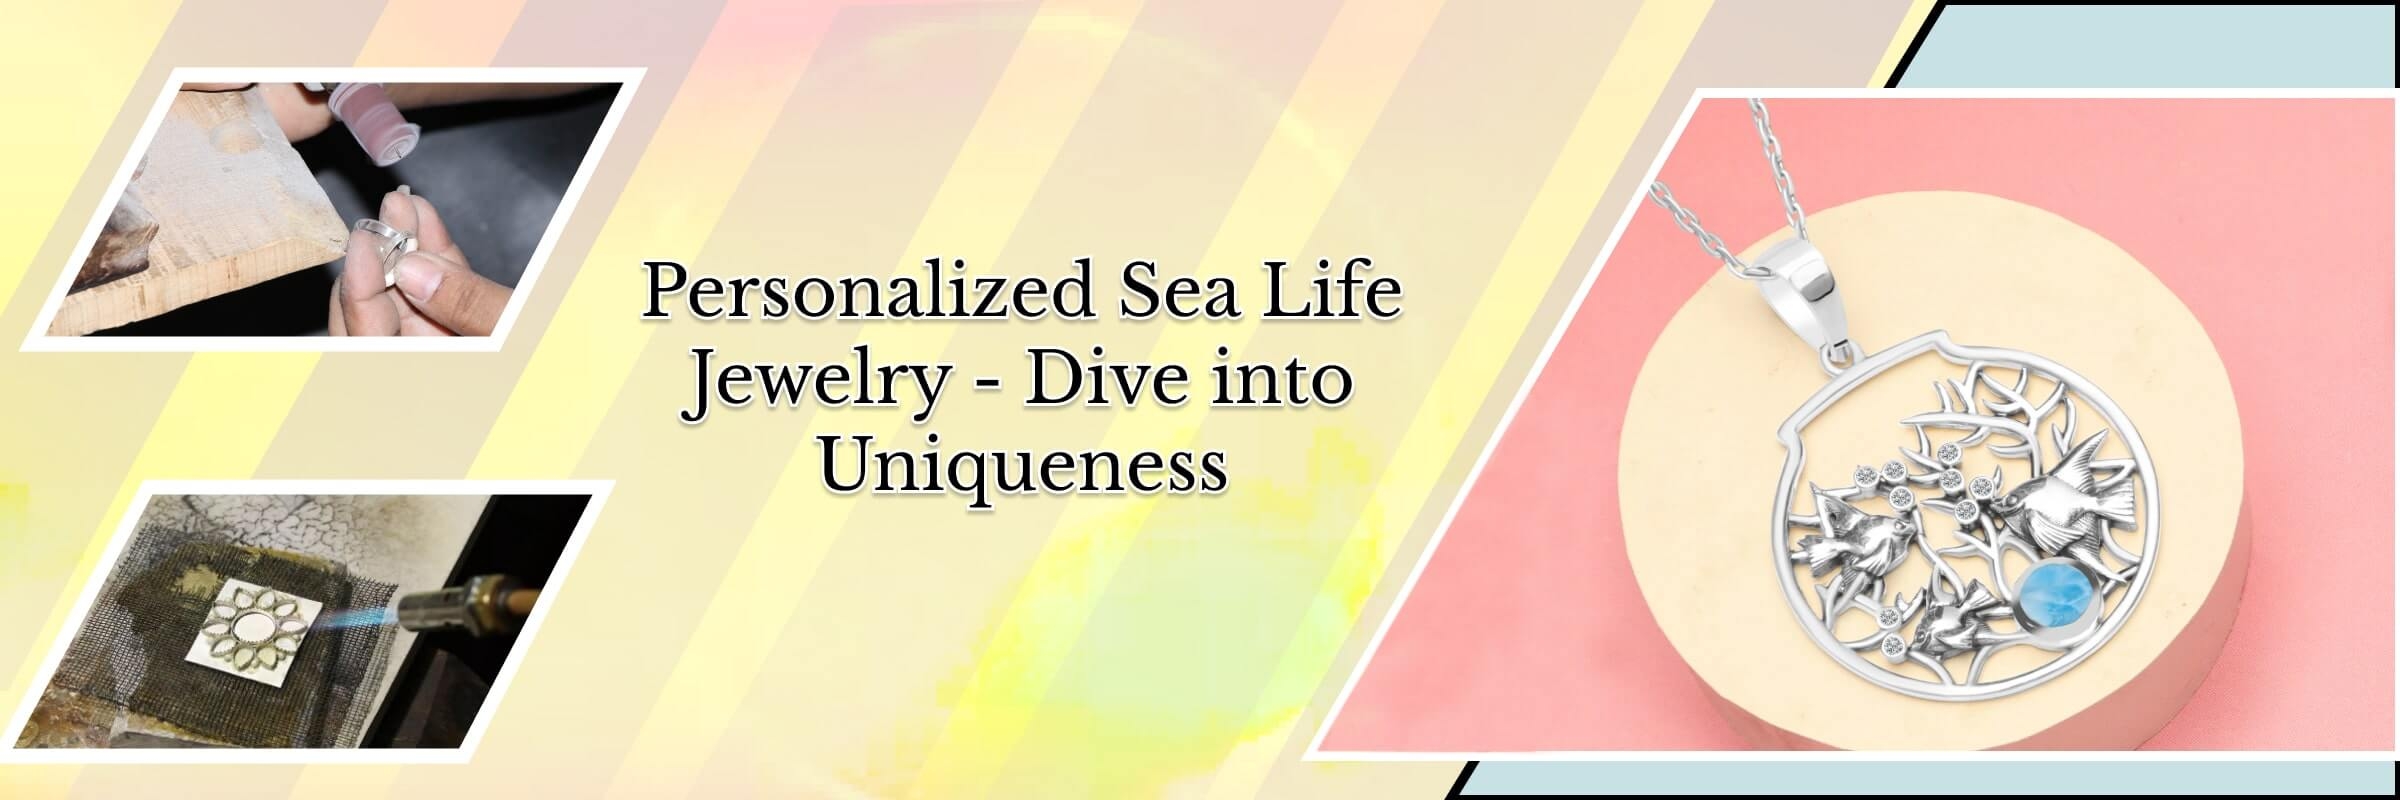 Customized Sea Life Jewelry - What Customizations You Can Expect